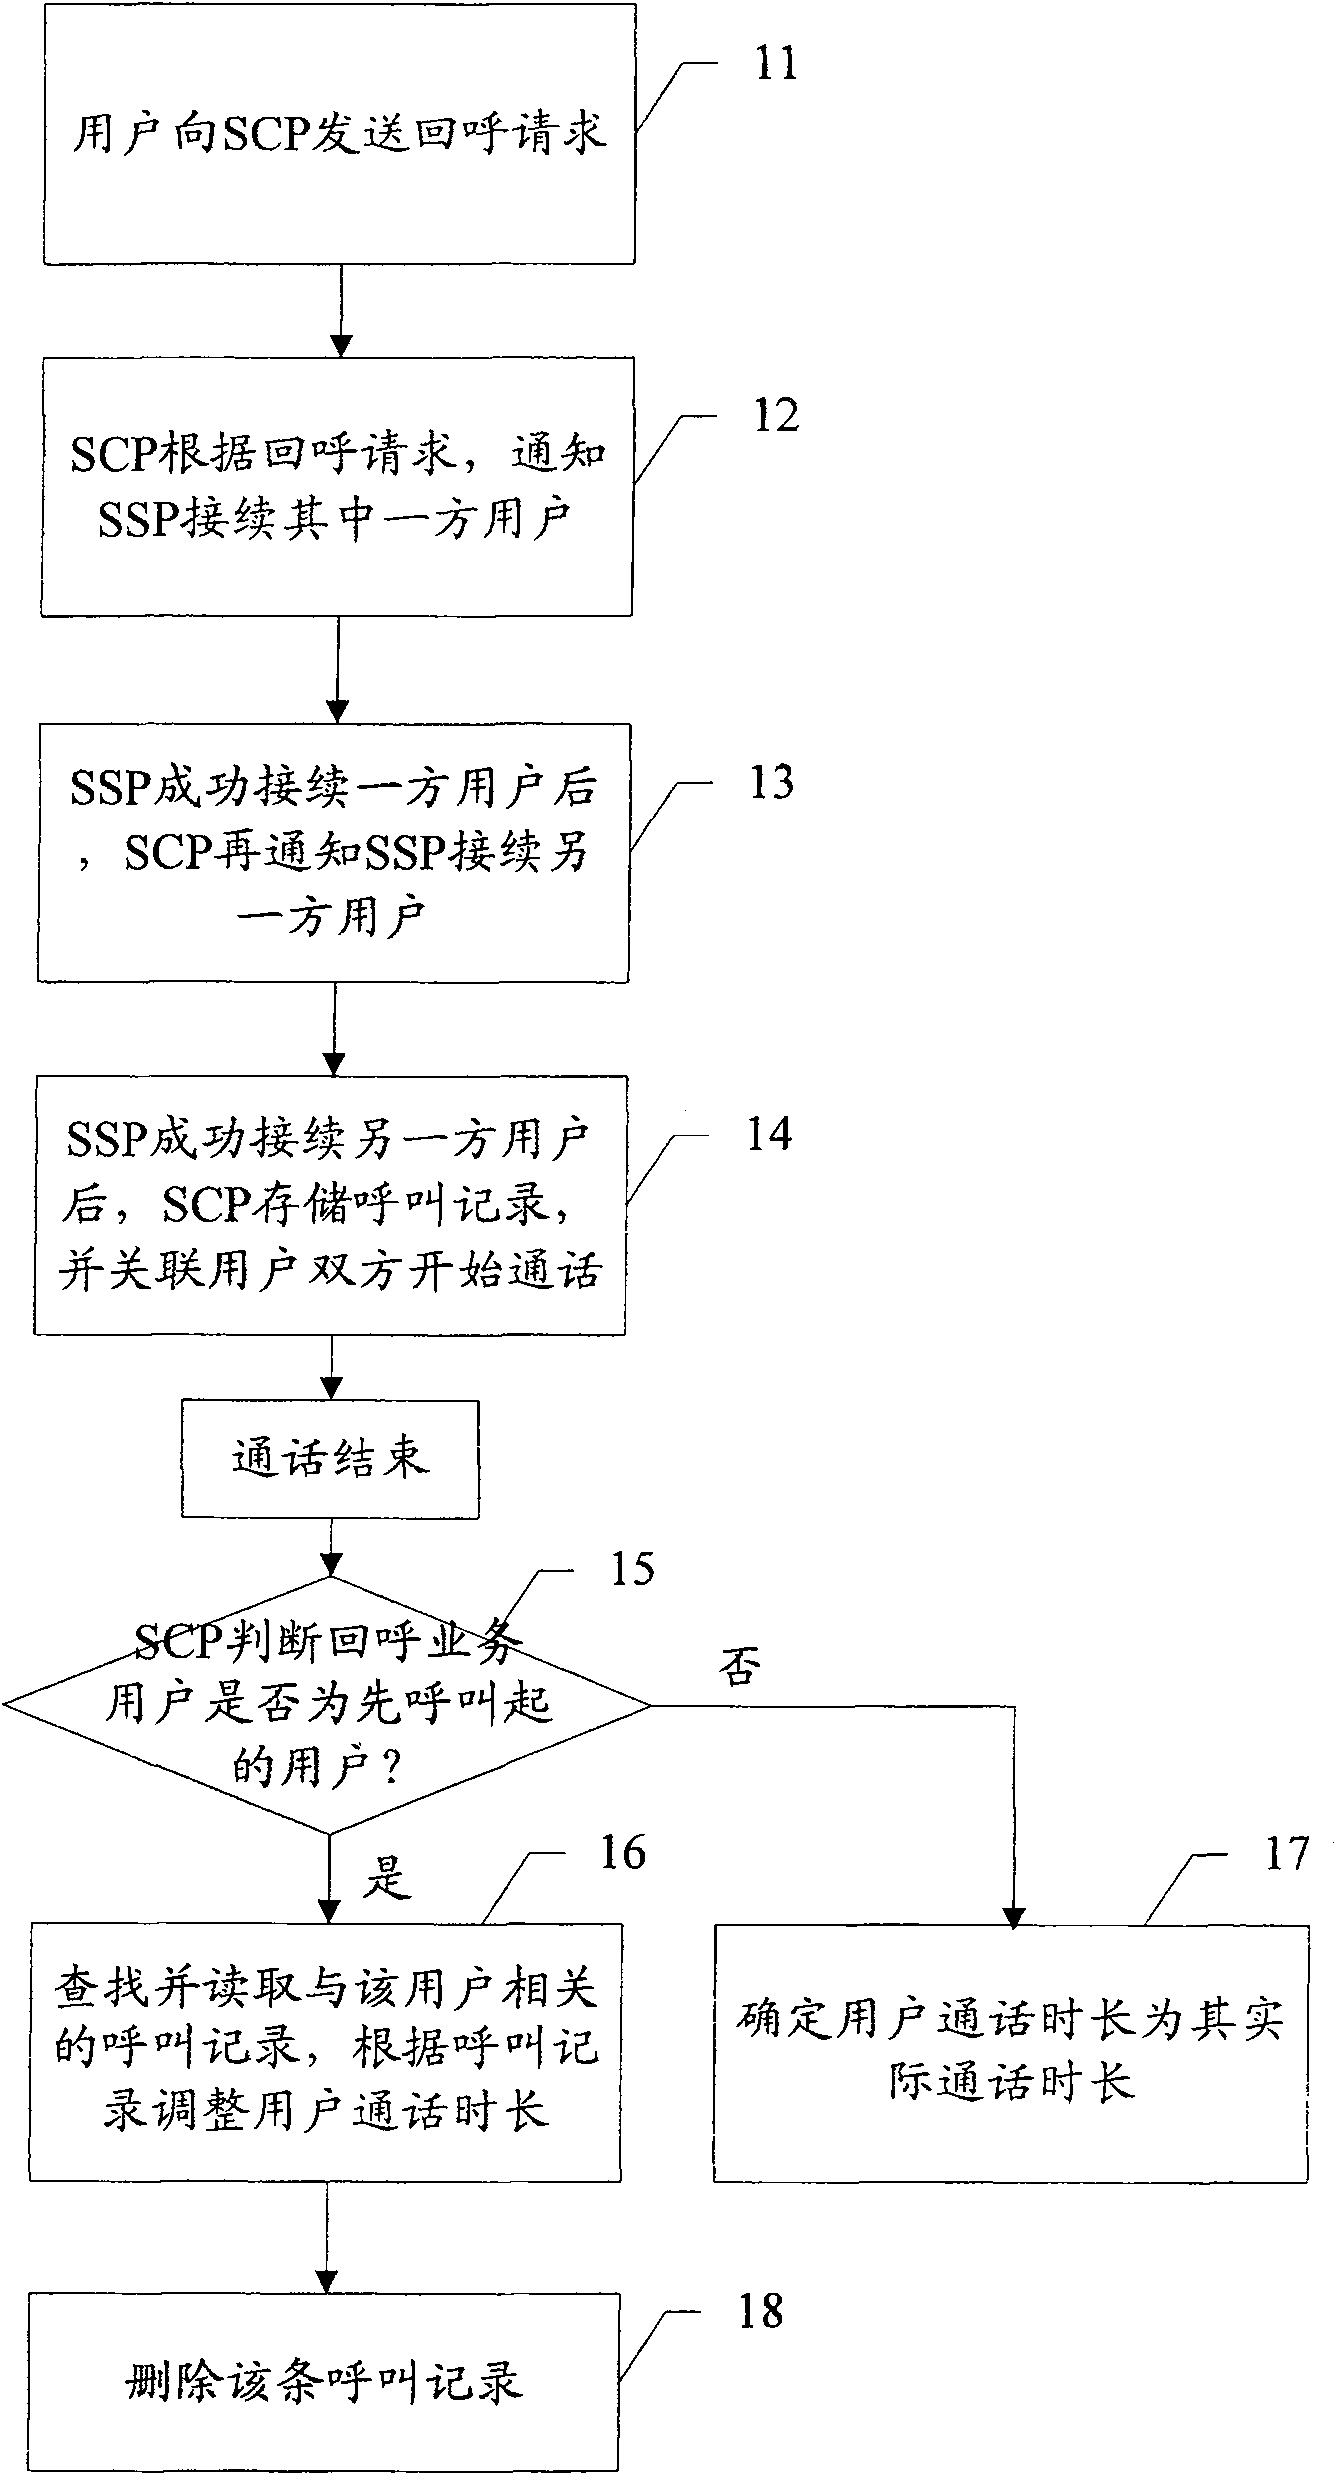 Method of determining call duration of callback service